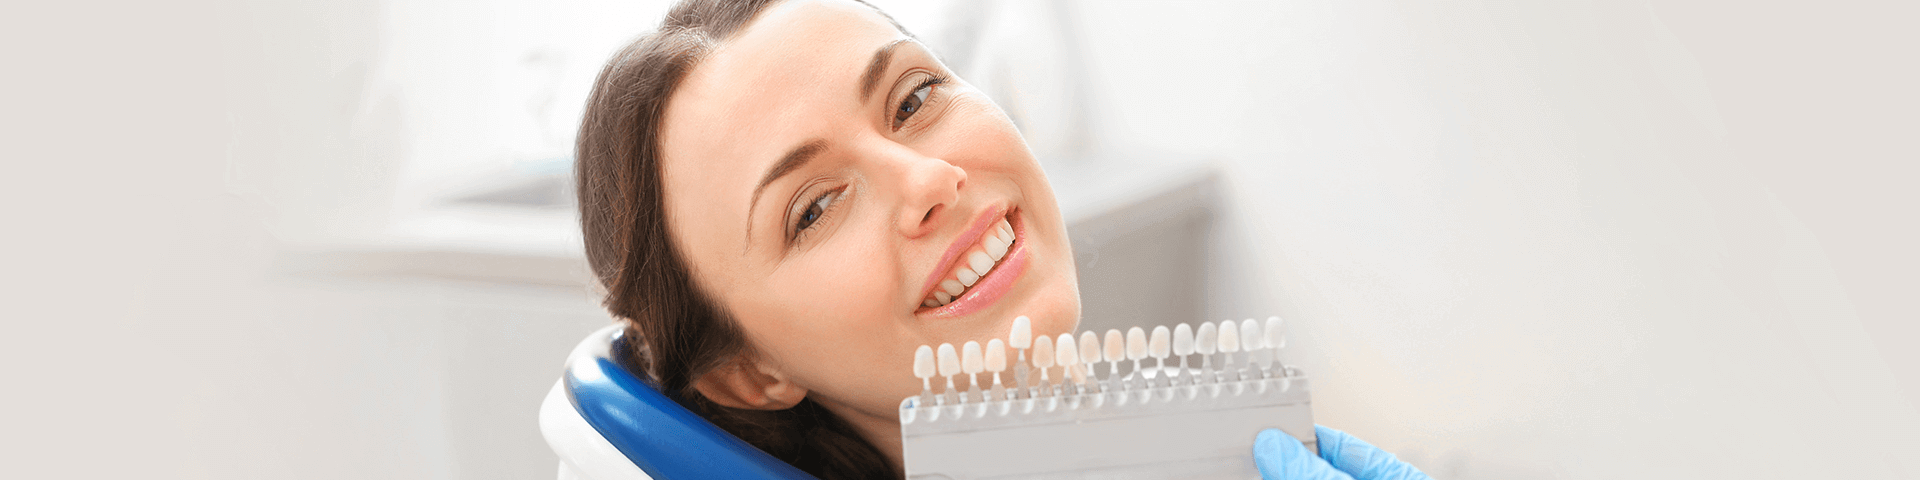 An Overview of The Dental Veneers Process